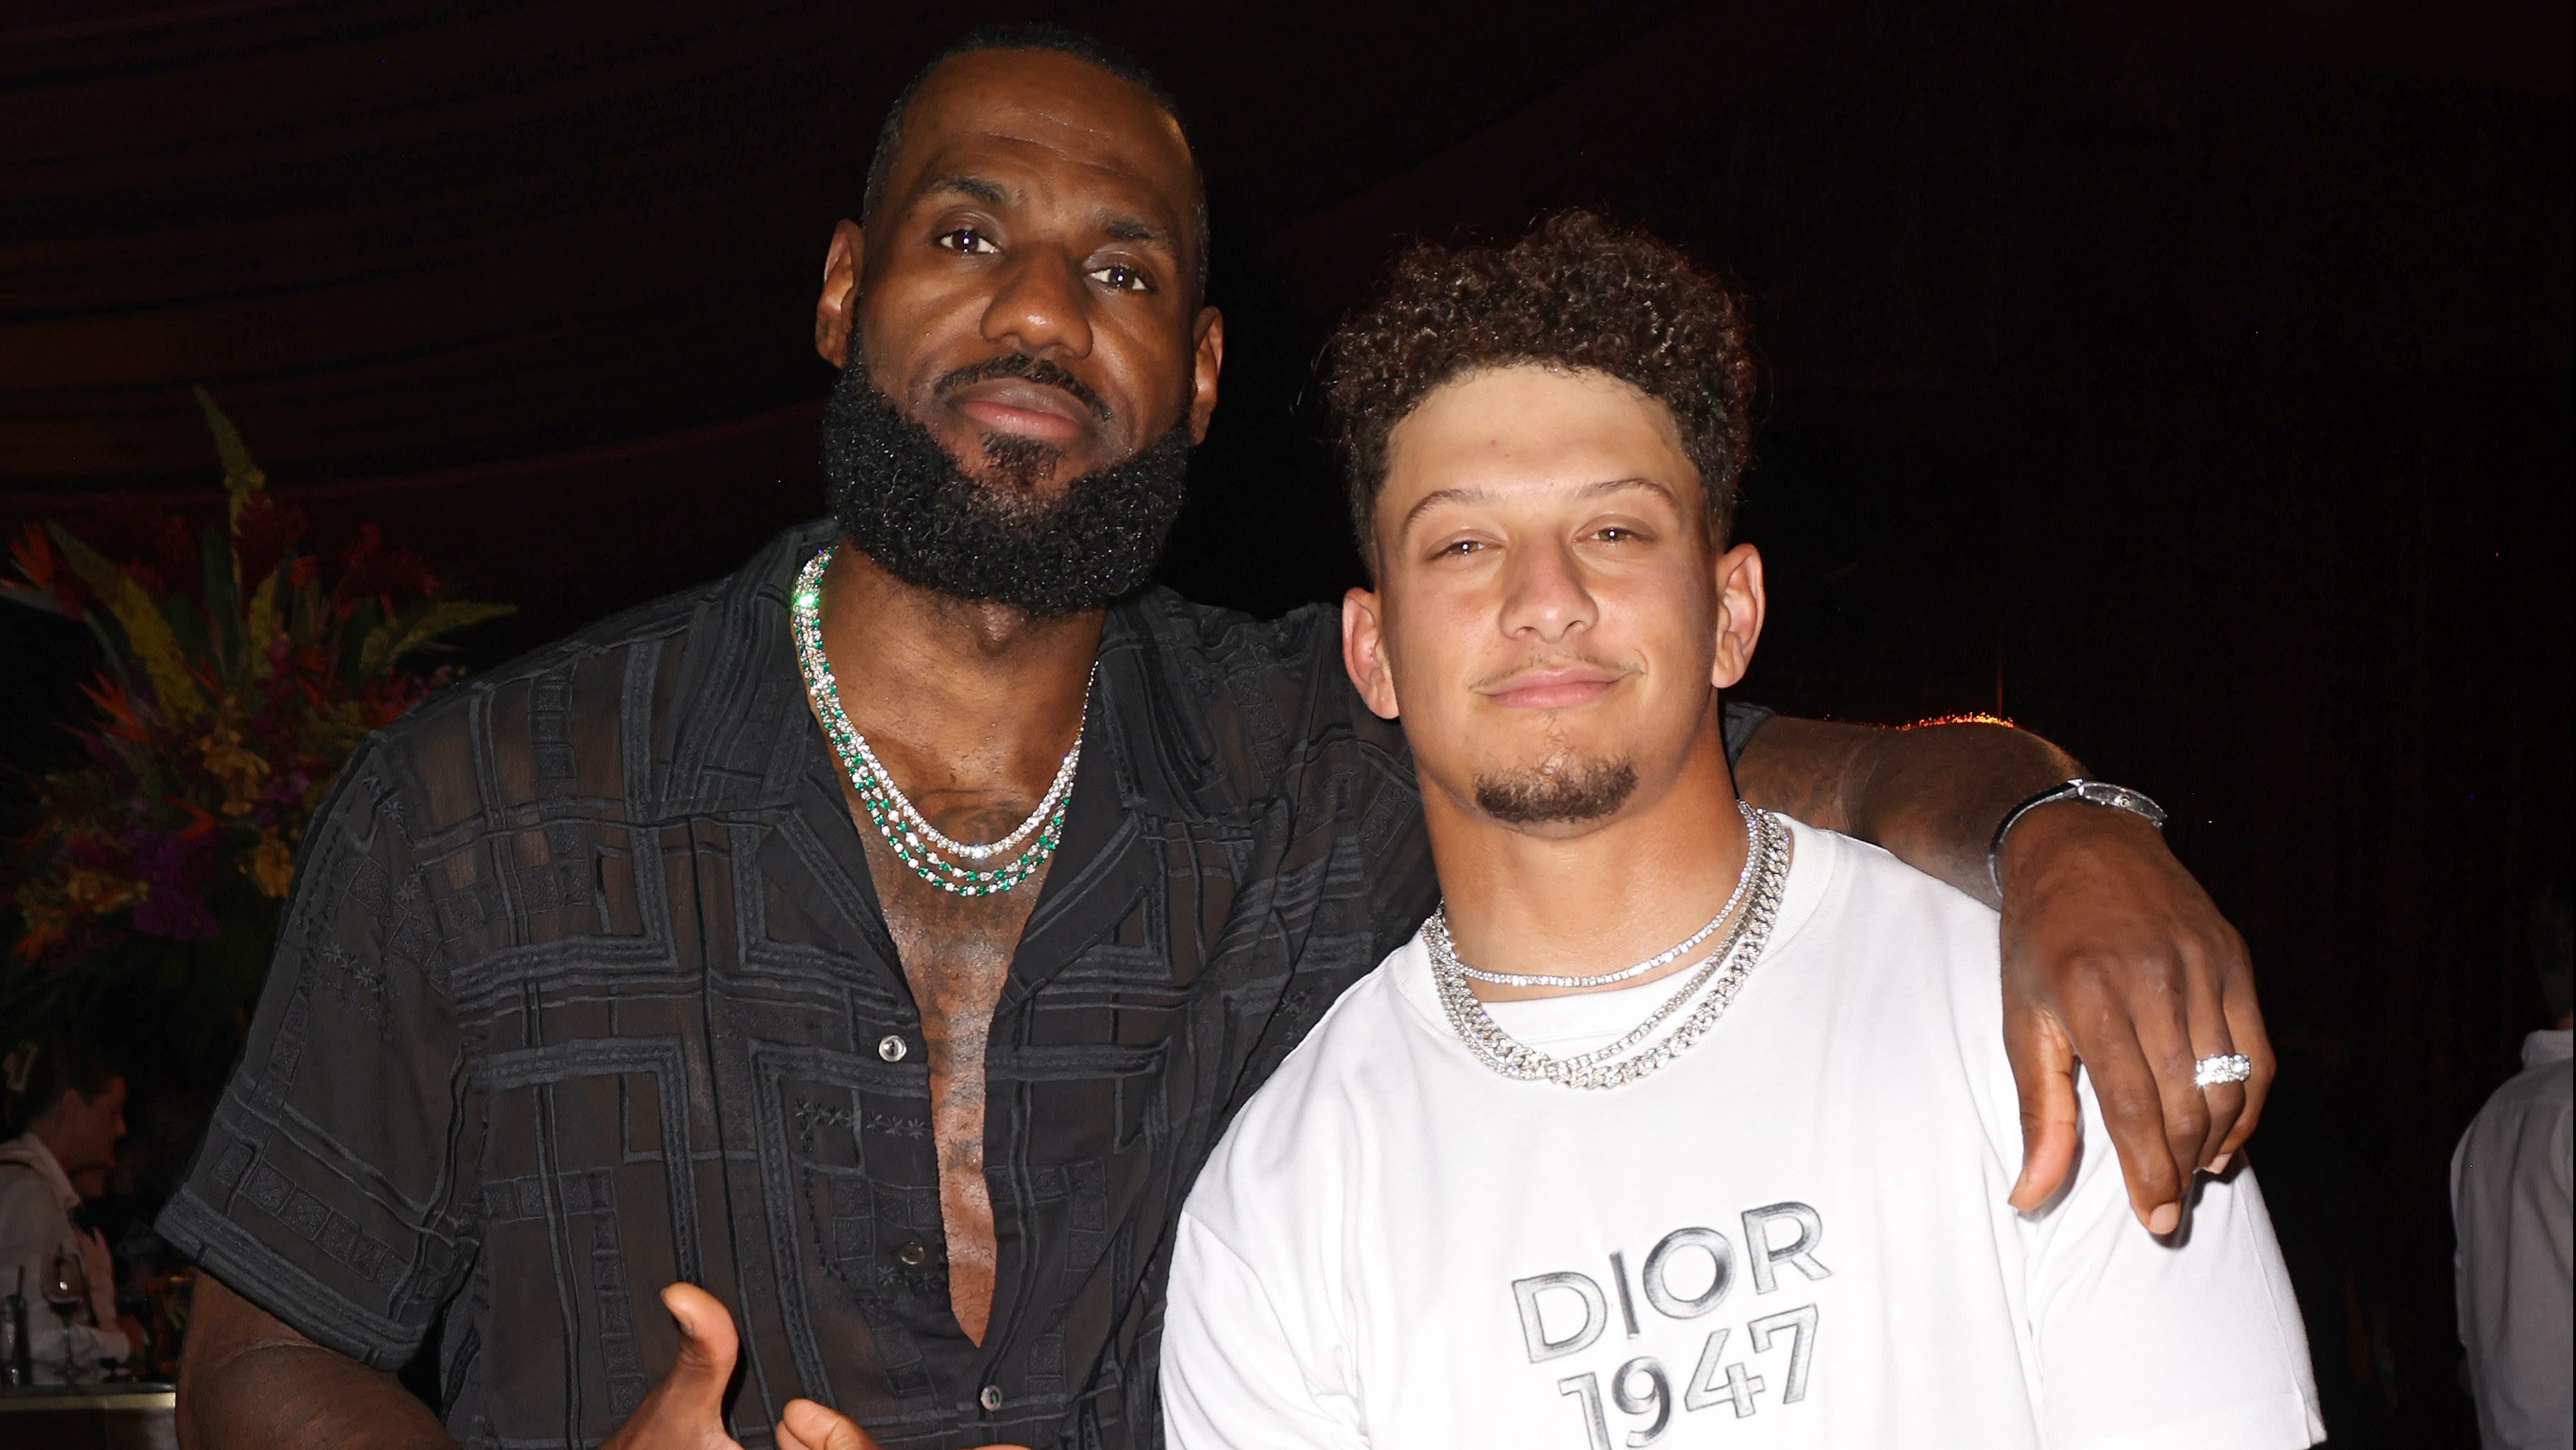 LeBron James, Patrick Mahomes, Kevin Durant And More Attend Carbone Beach Party